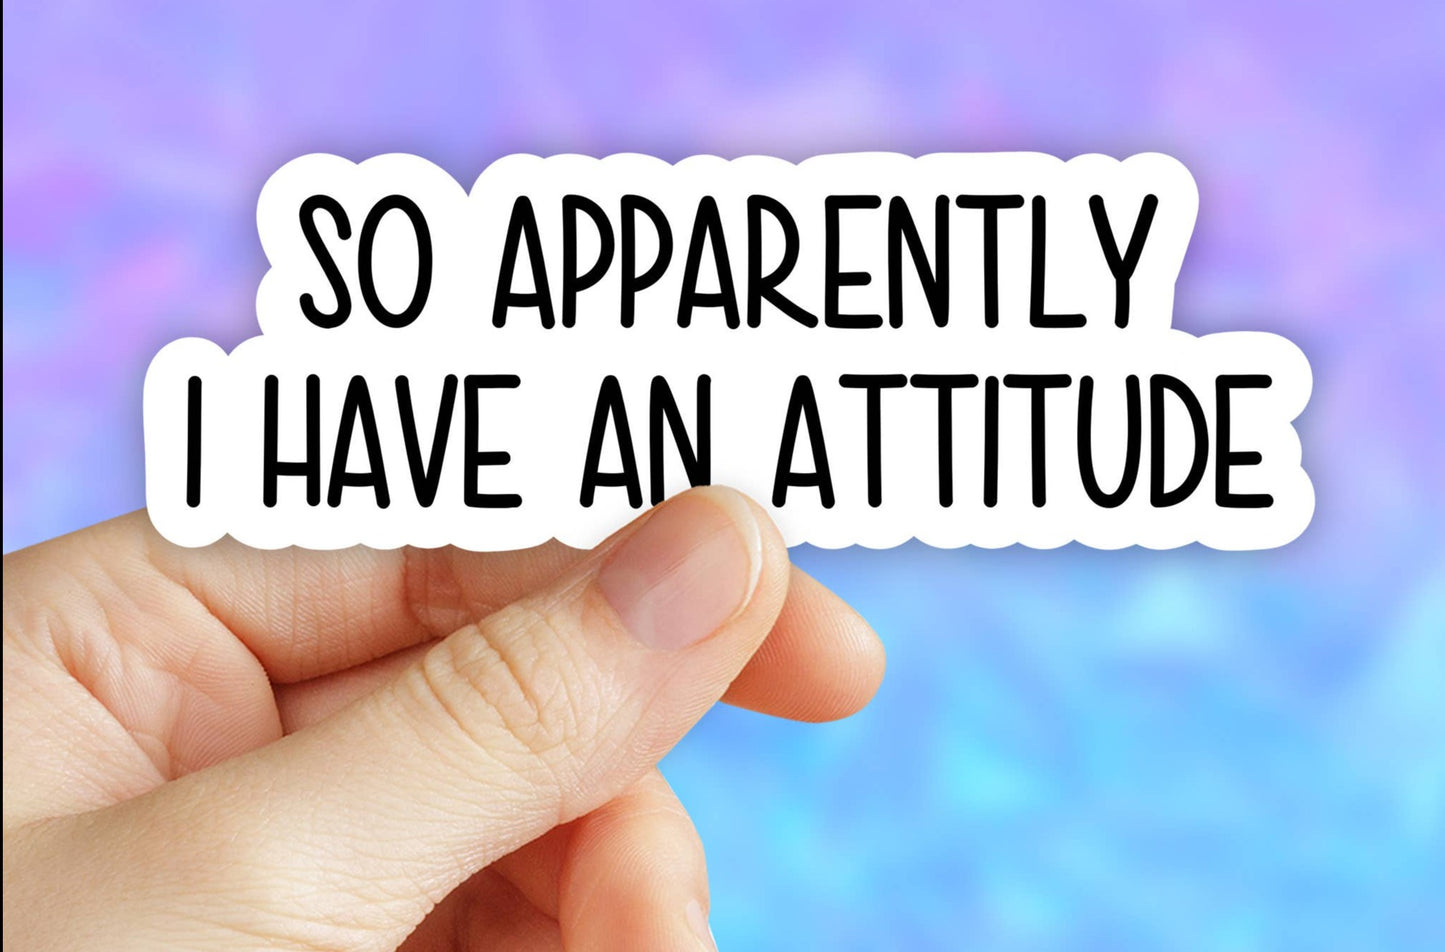 So apparently i have an attitude sticker, Laptop stickers: 3" (Standard)